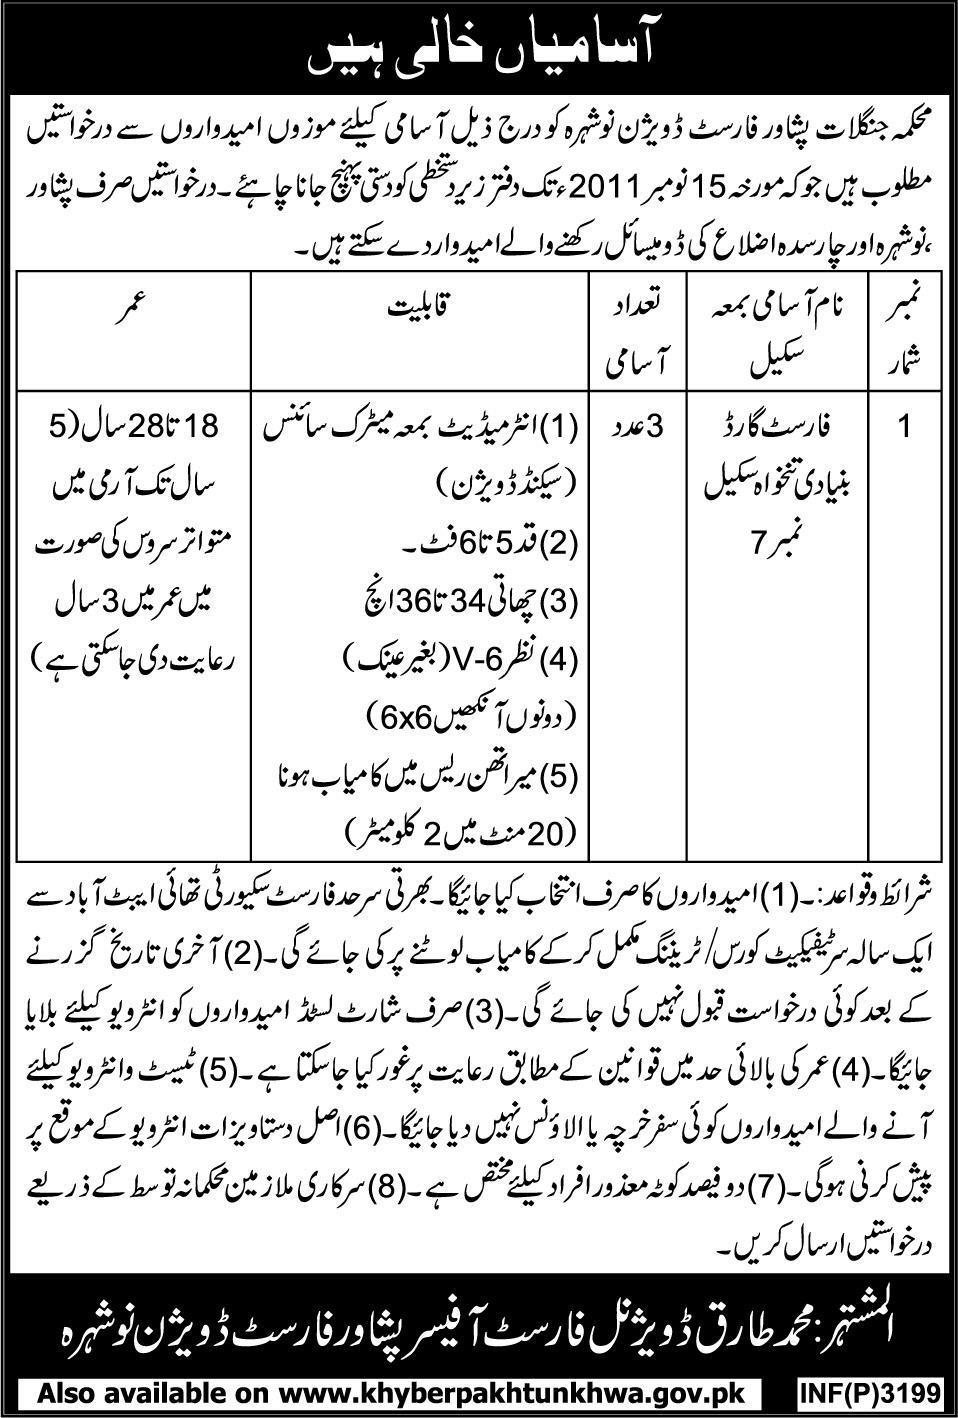 Department of Forestry Peshawar Division Nowshera Required Forest Guards